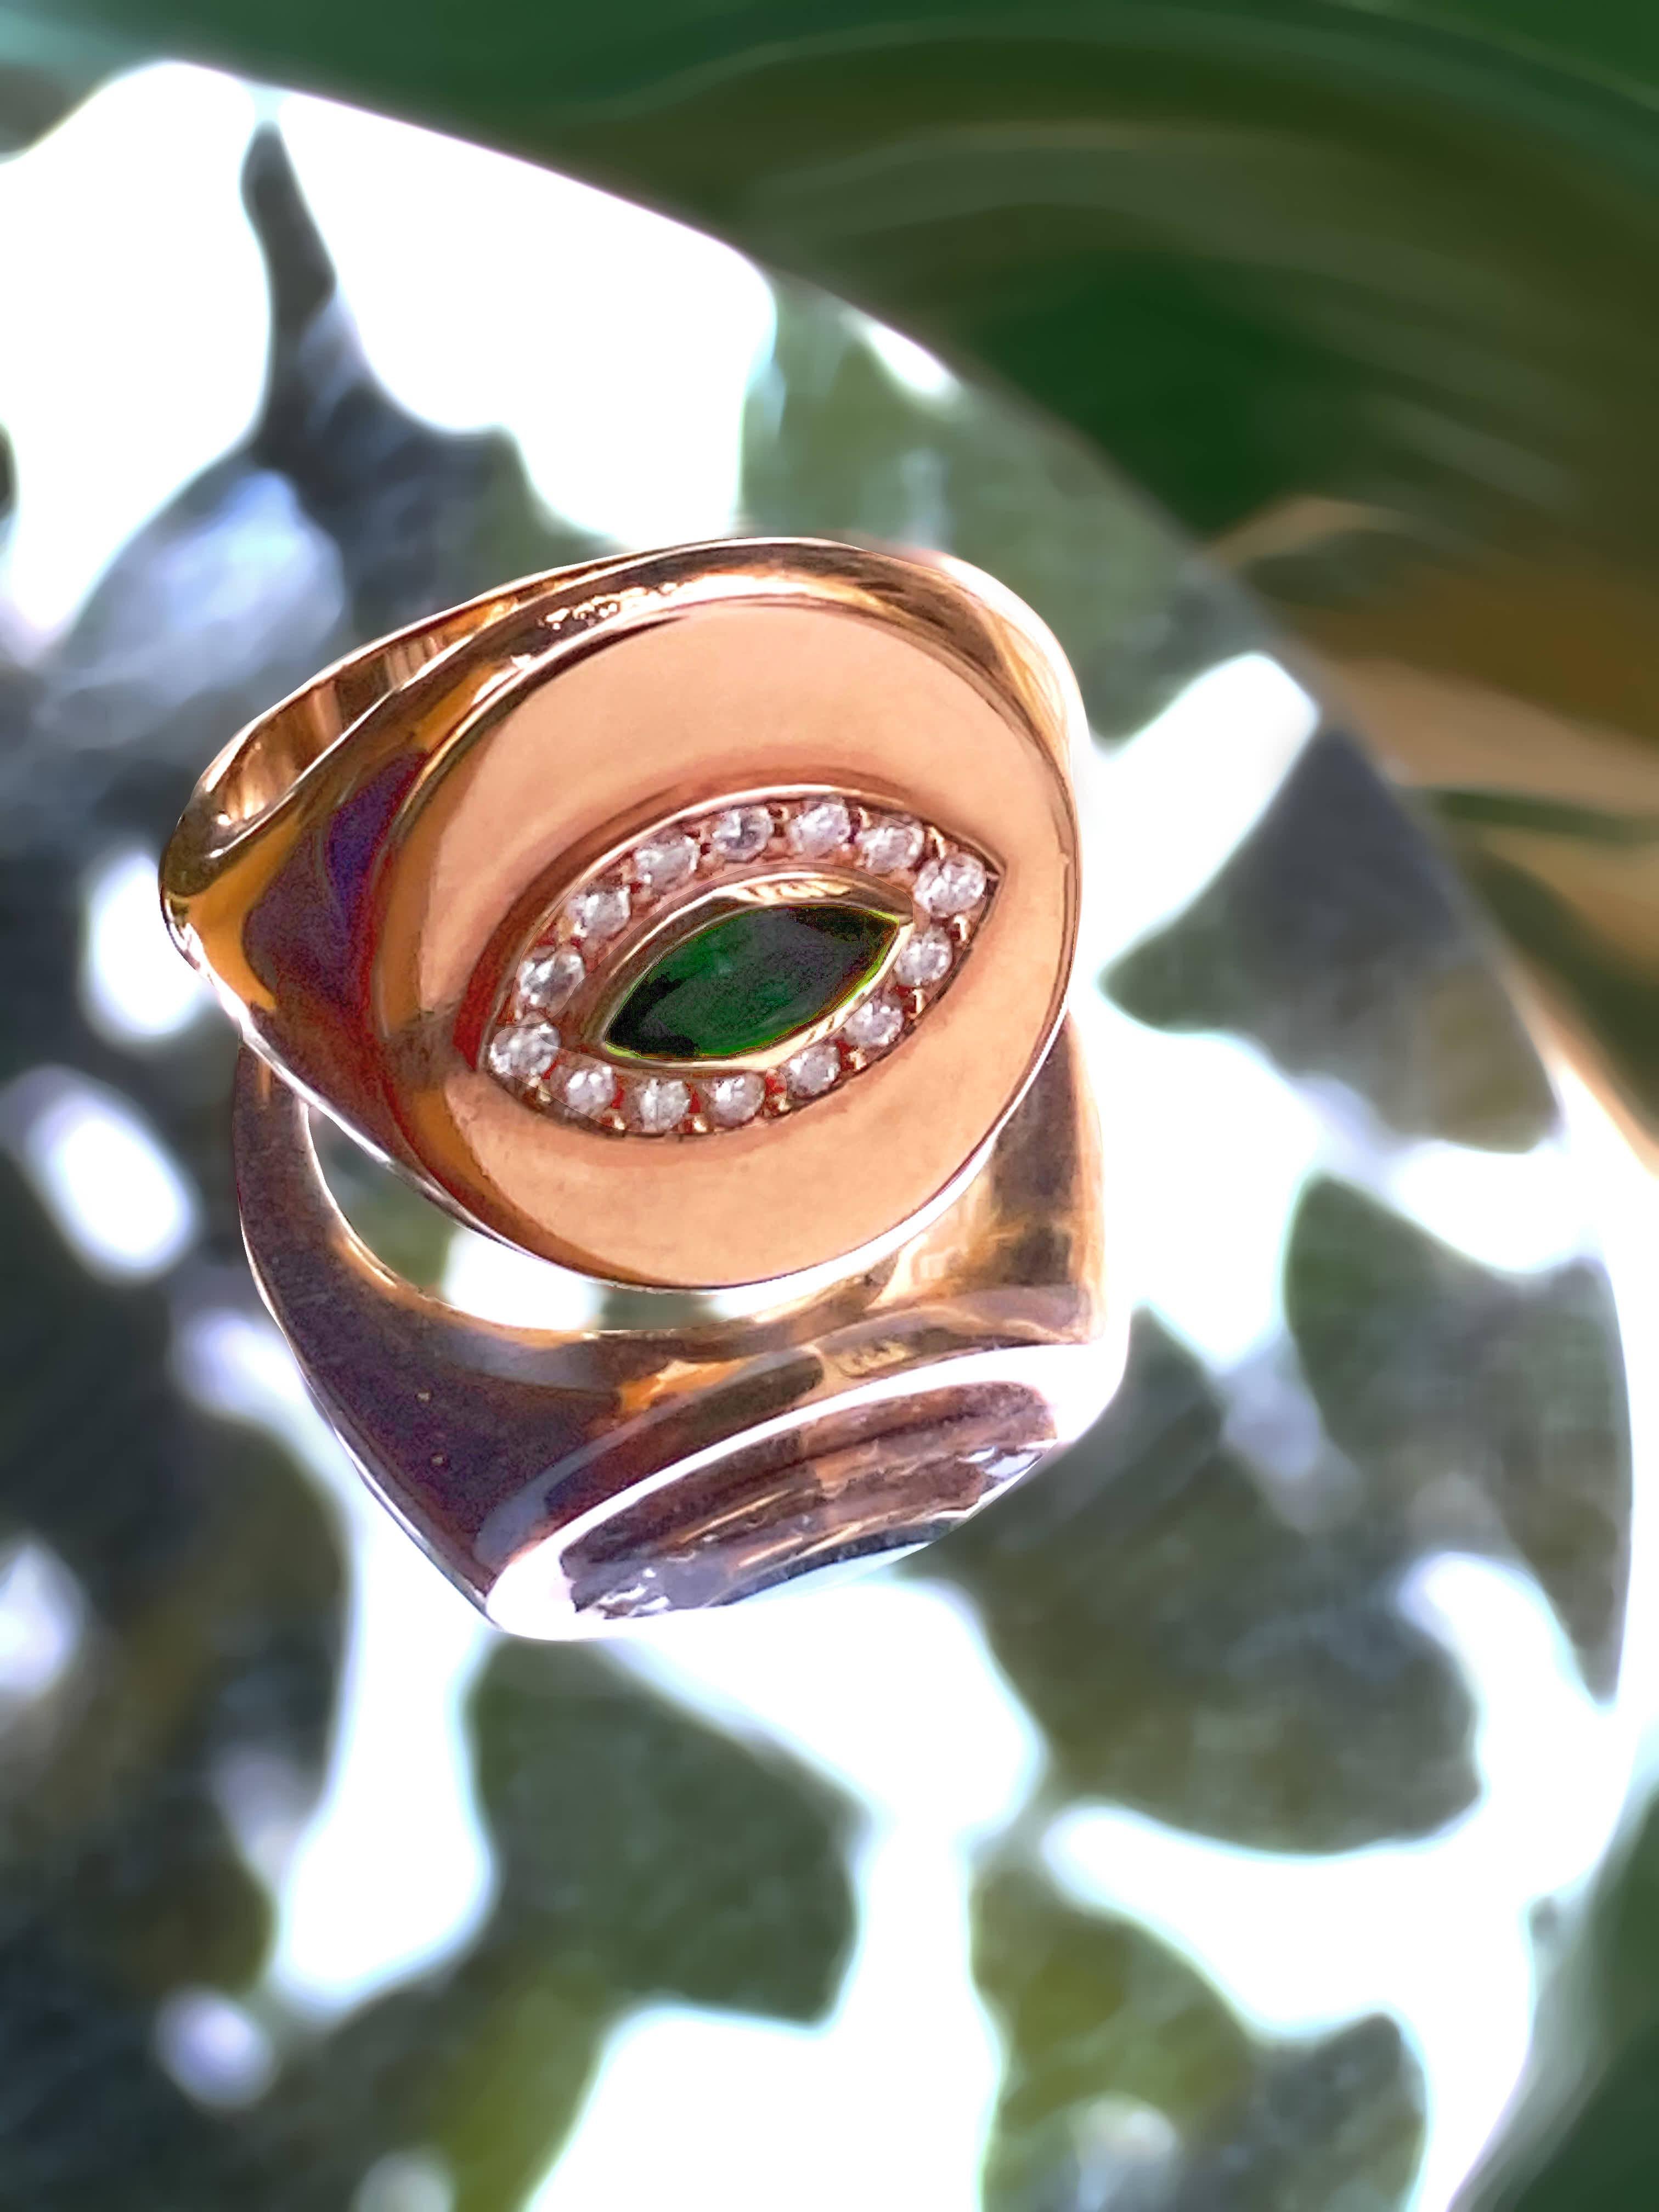 18 Karat Recycled Rose Gold, Green Tourmaline Marquise Cut and Diamond, Eye Ring For Sale 2